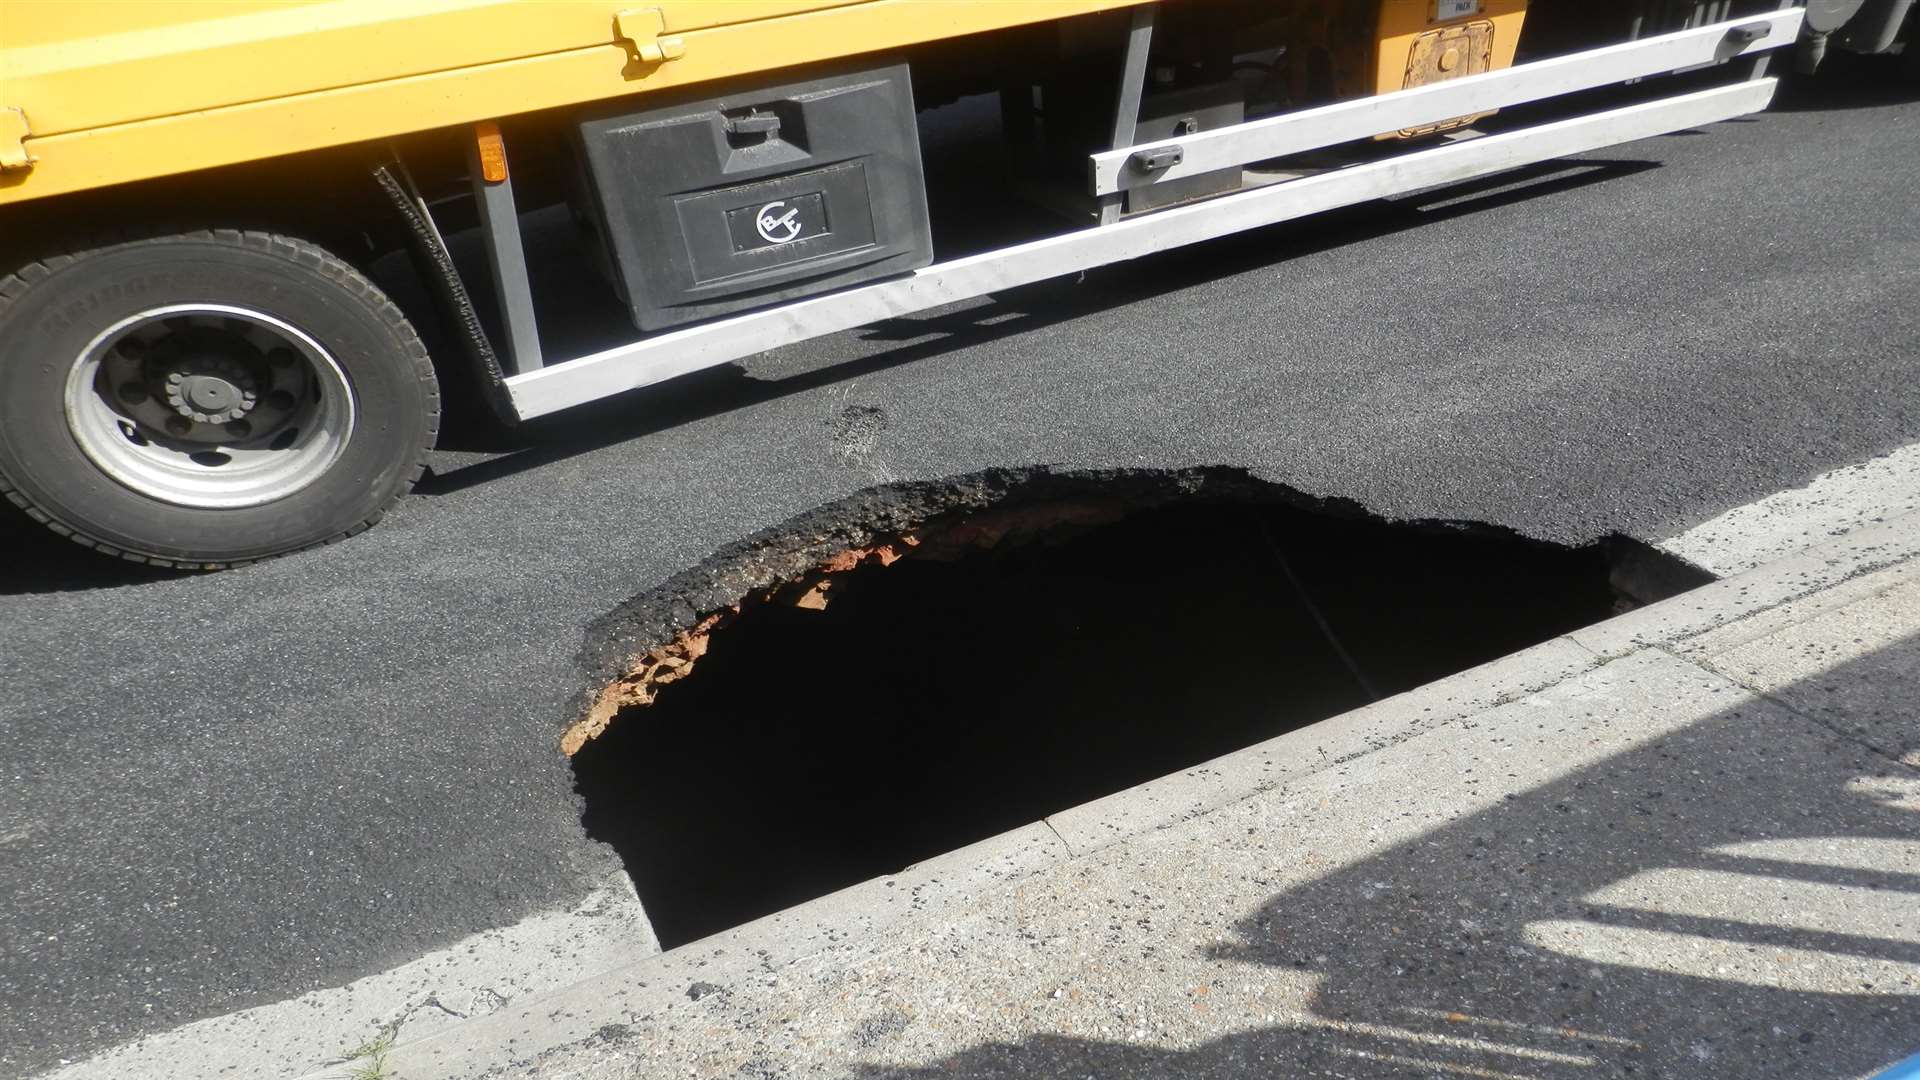 The hole is so deep it could fit four cars inside it. Picture: Nicole Xhepa